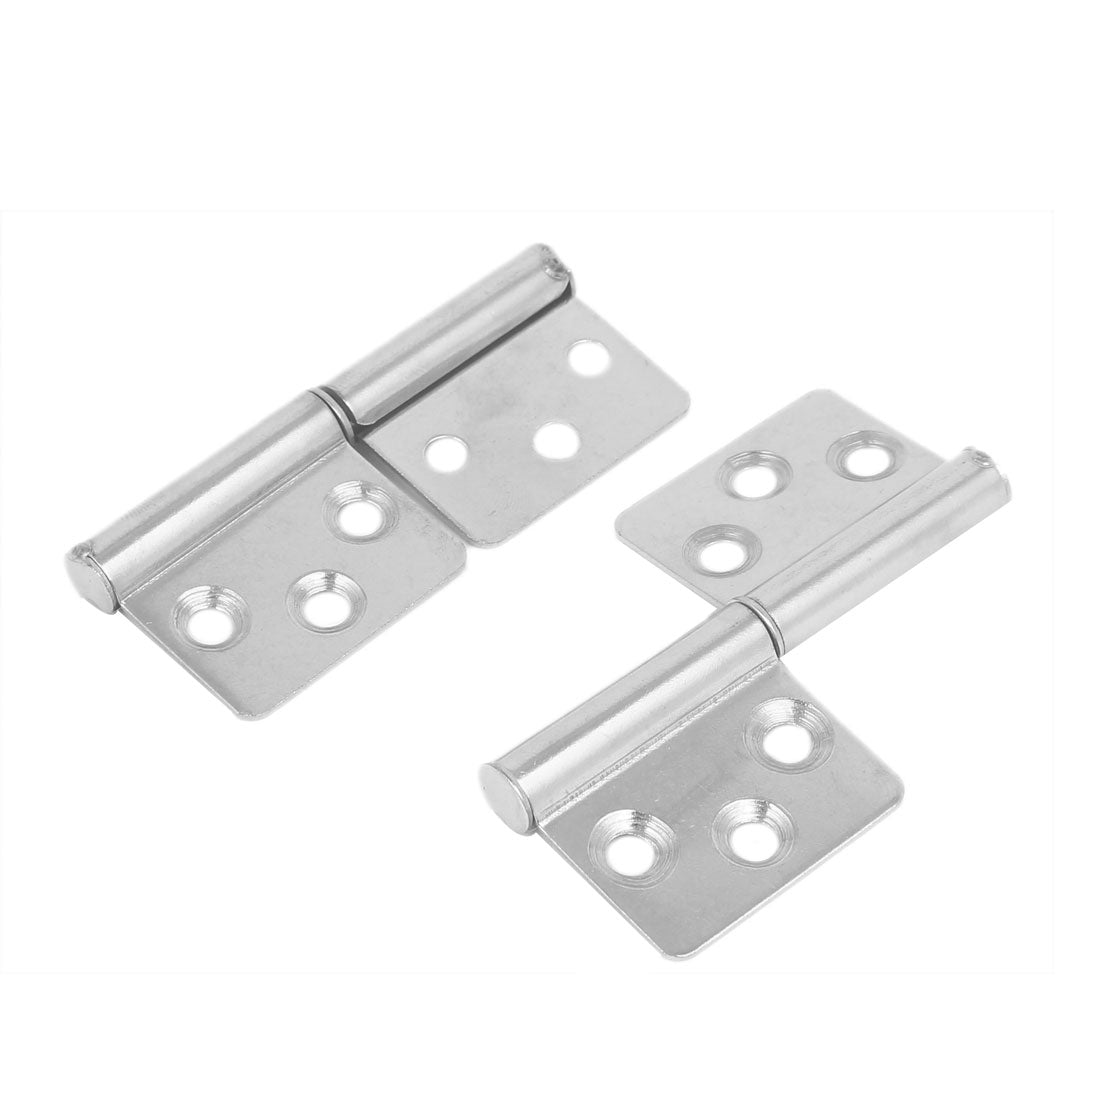 uxcell Uxcell 3-inch Long Stainless Steel Two Leaves Detachable Flag Hinge 4pcs for Window Door